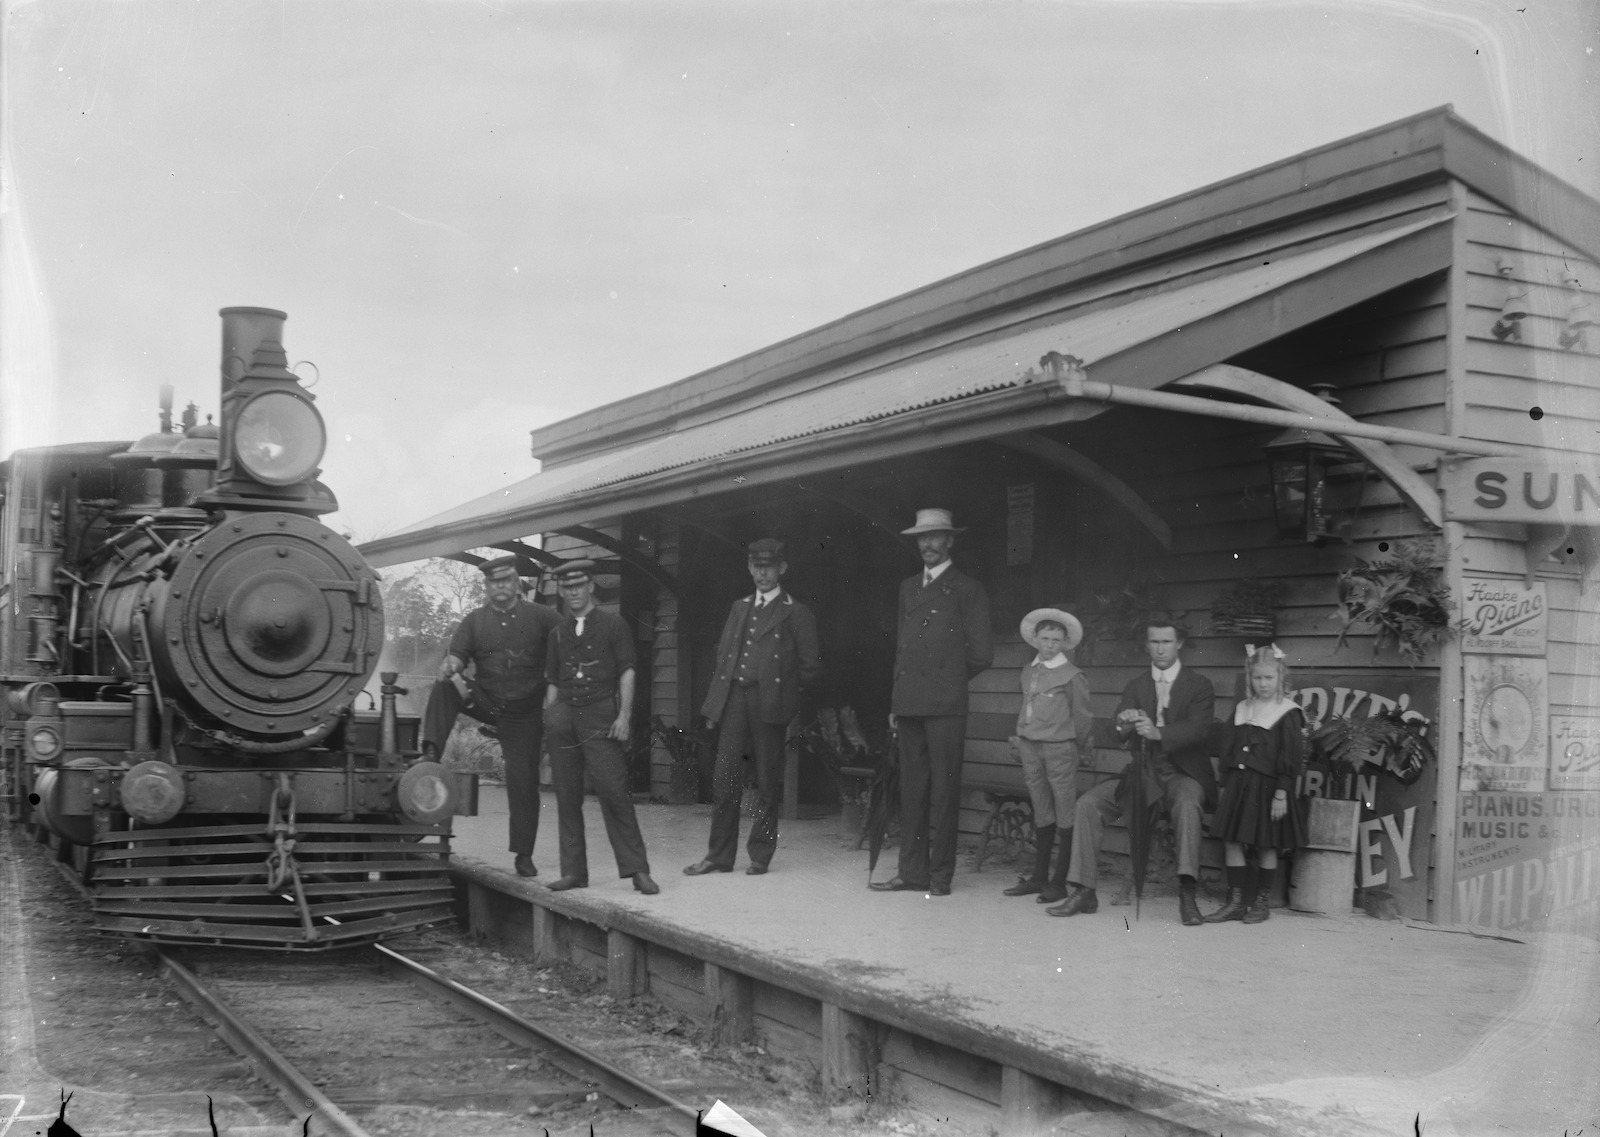 People stand on the platform at Sunnybank Station